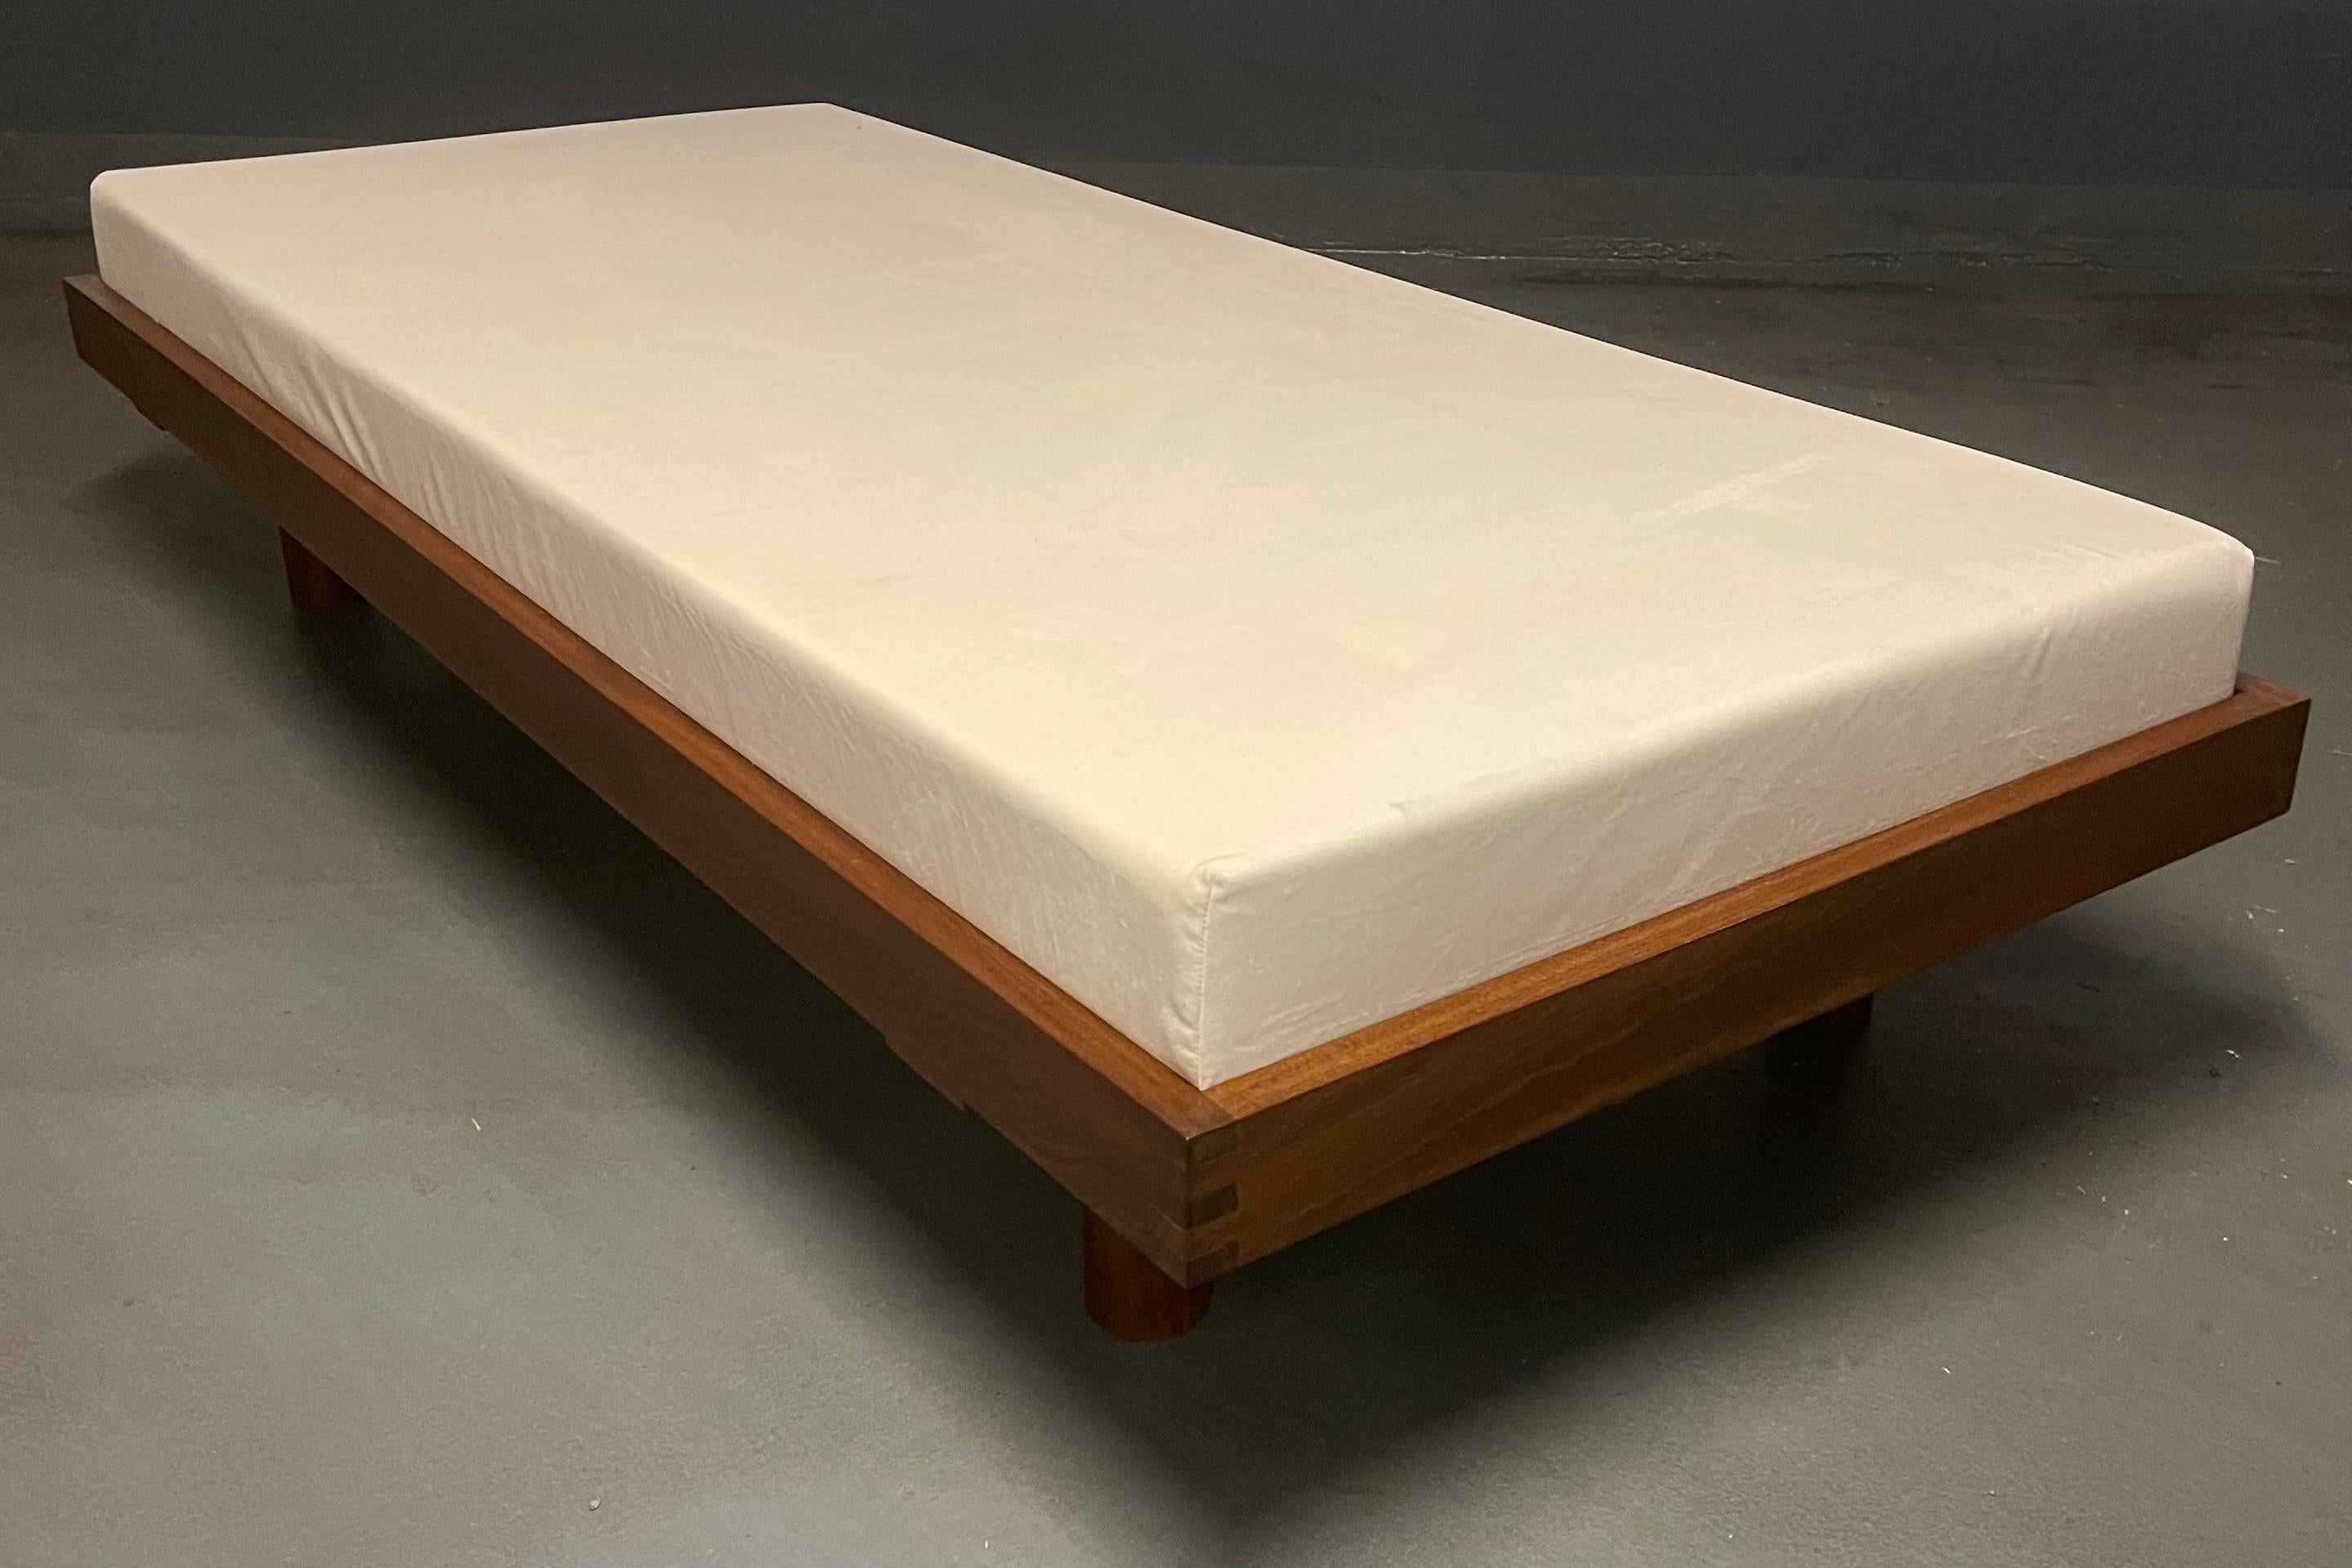 a rare and early daybed by pierre chapo. original designed for the writer samuel beckett it has the nickname godot......